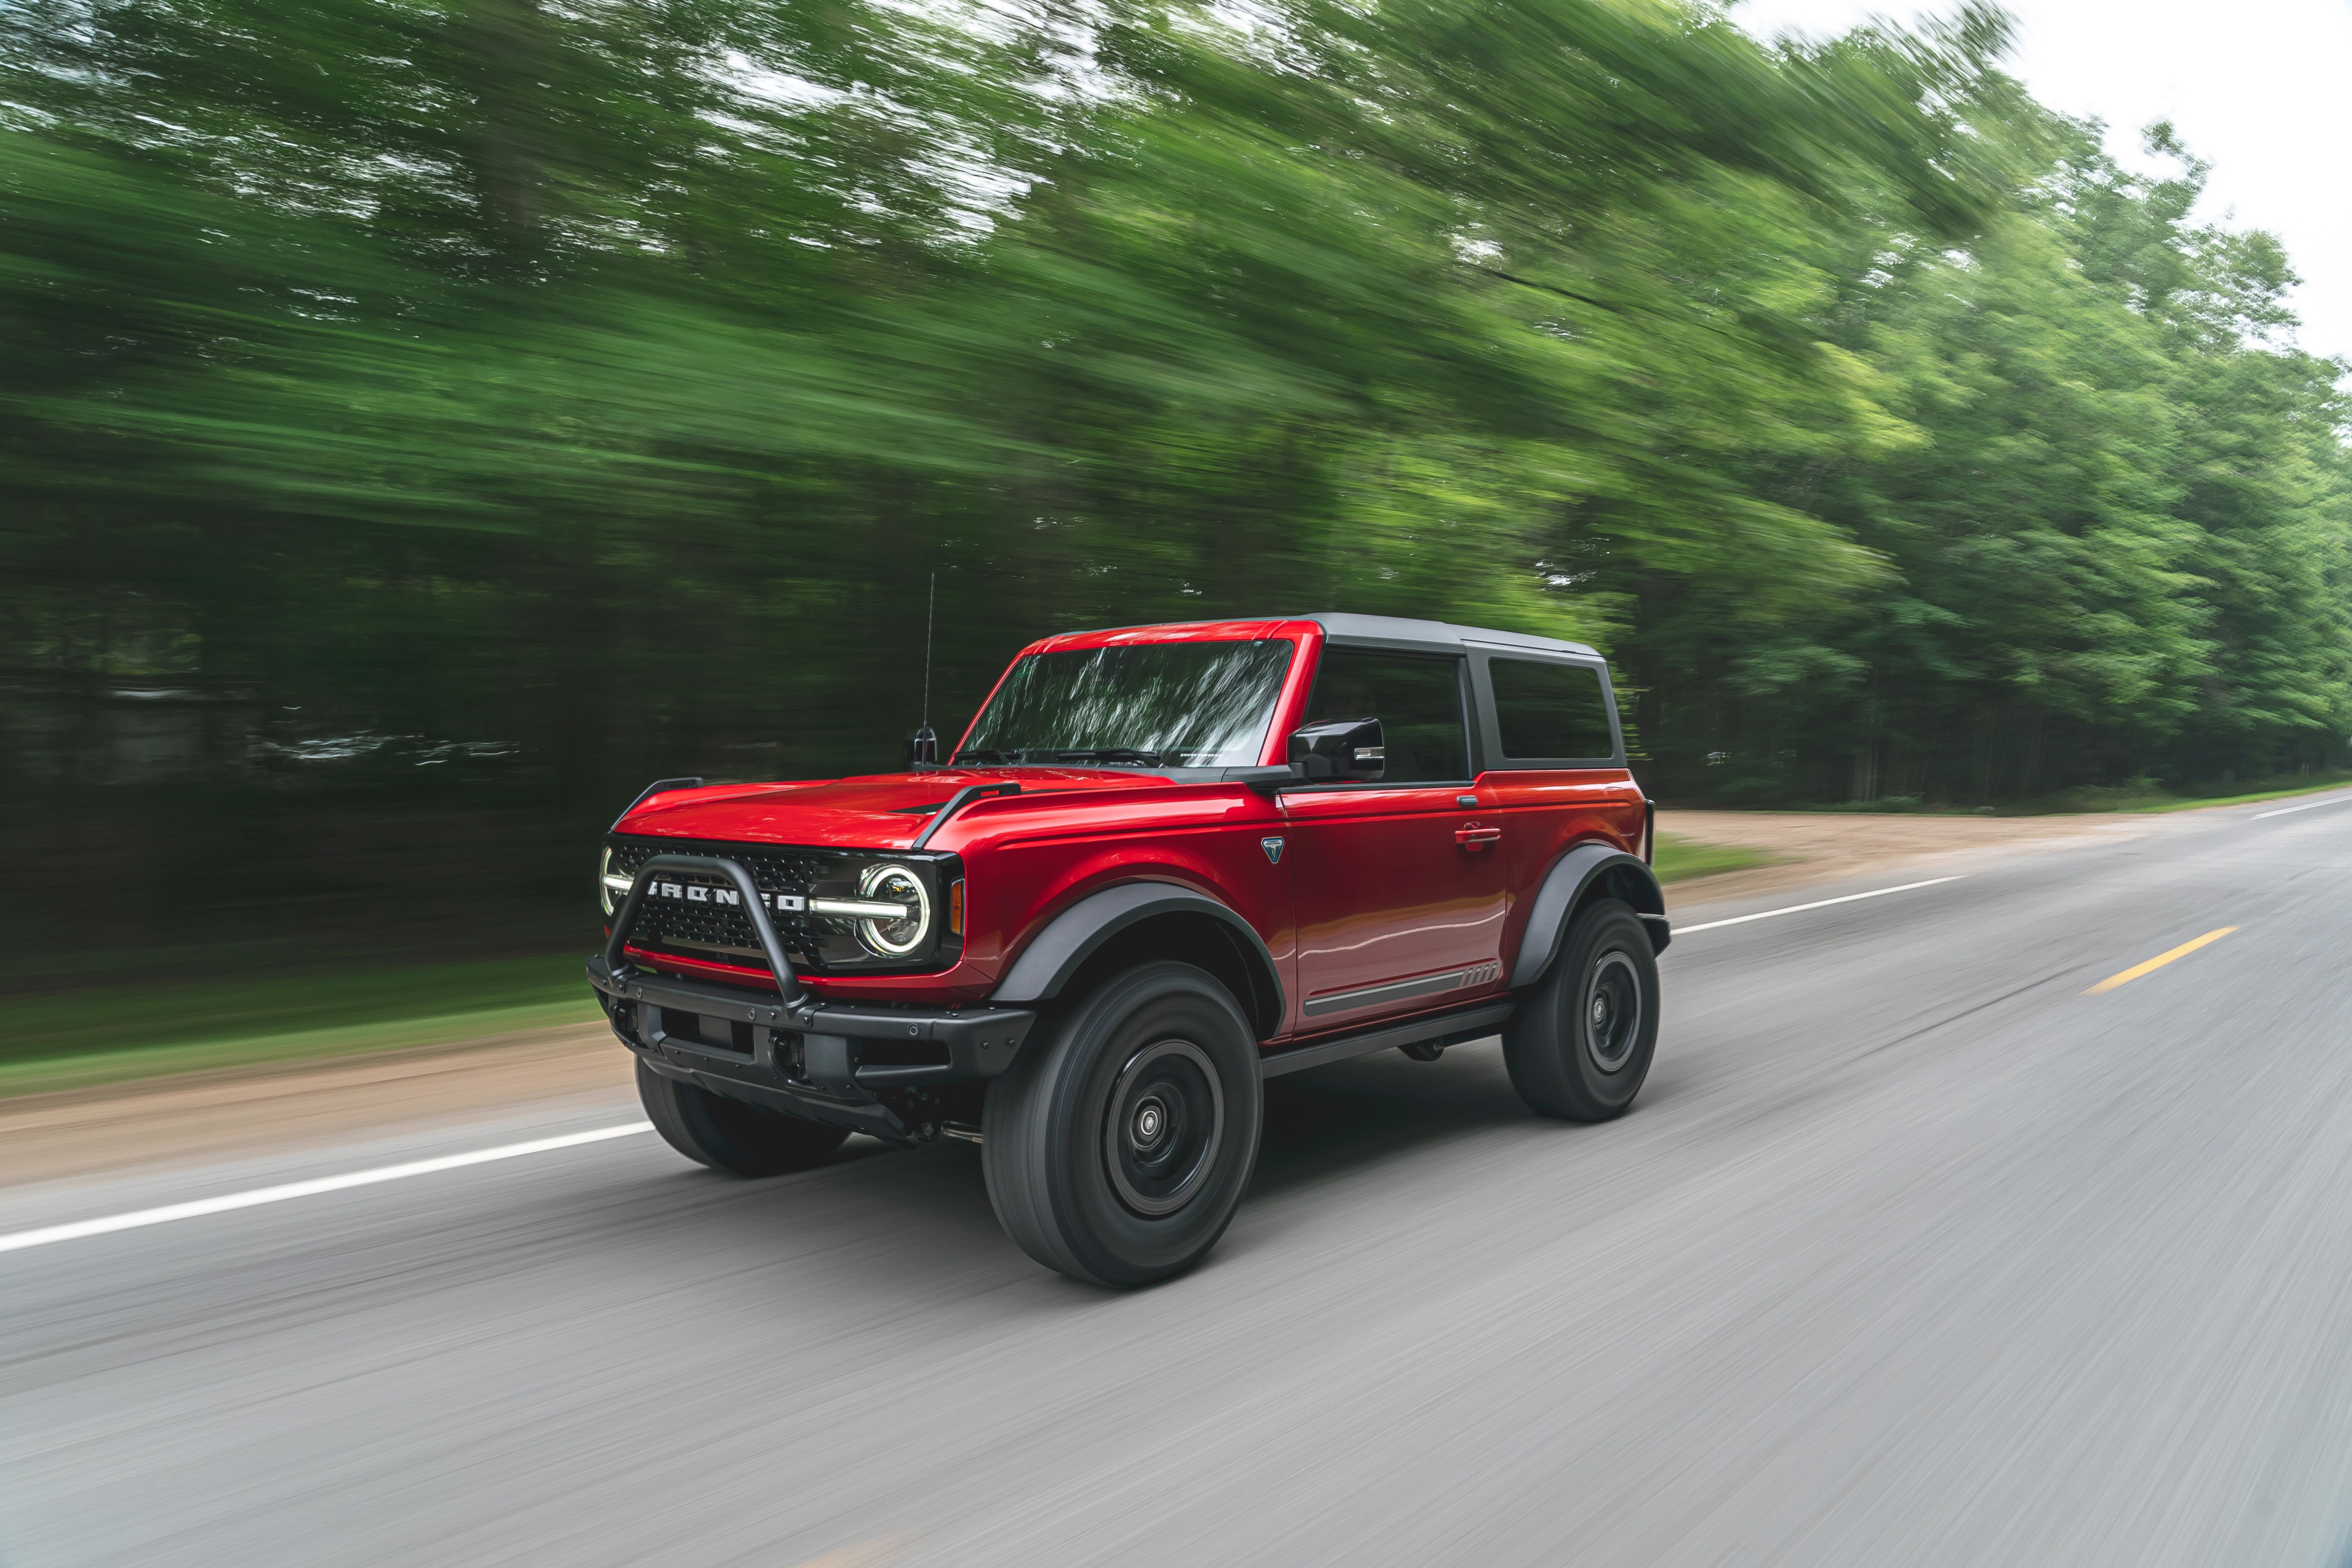 2022 Ford Bronco: Car and Driver 10Best